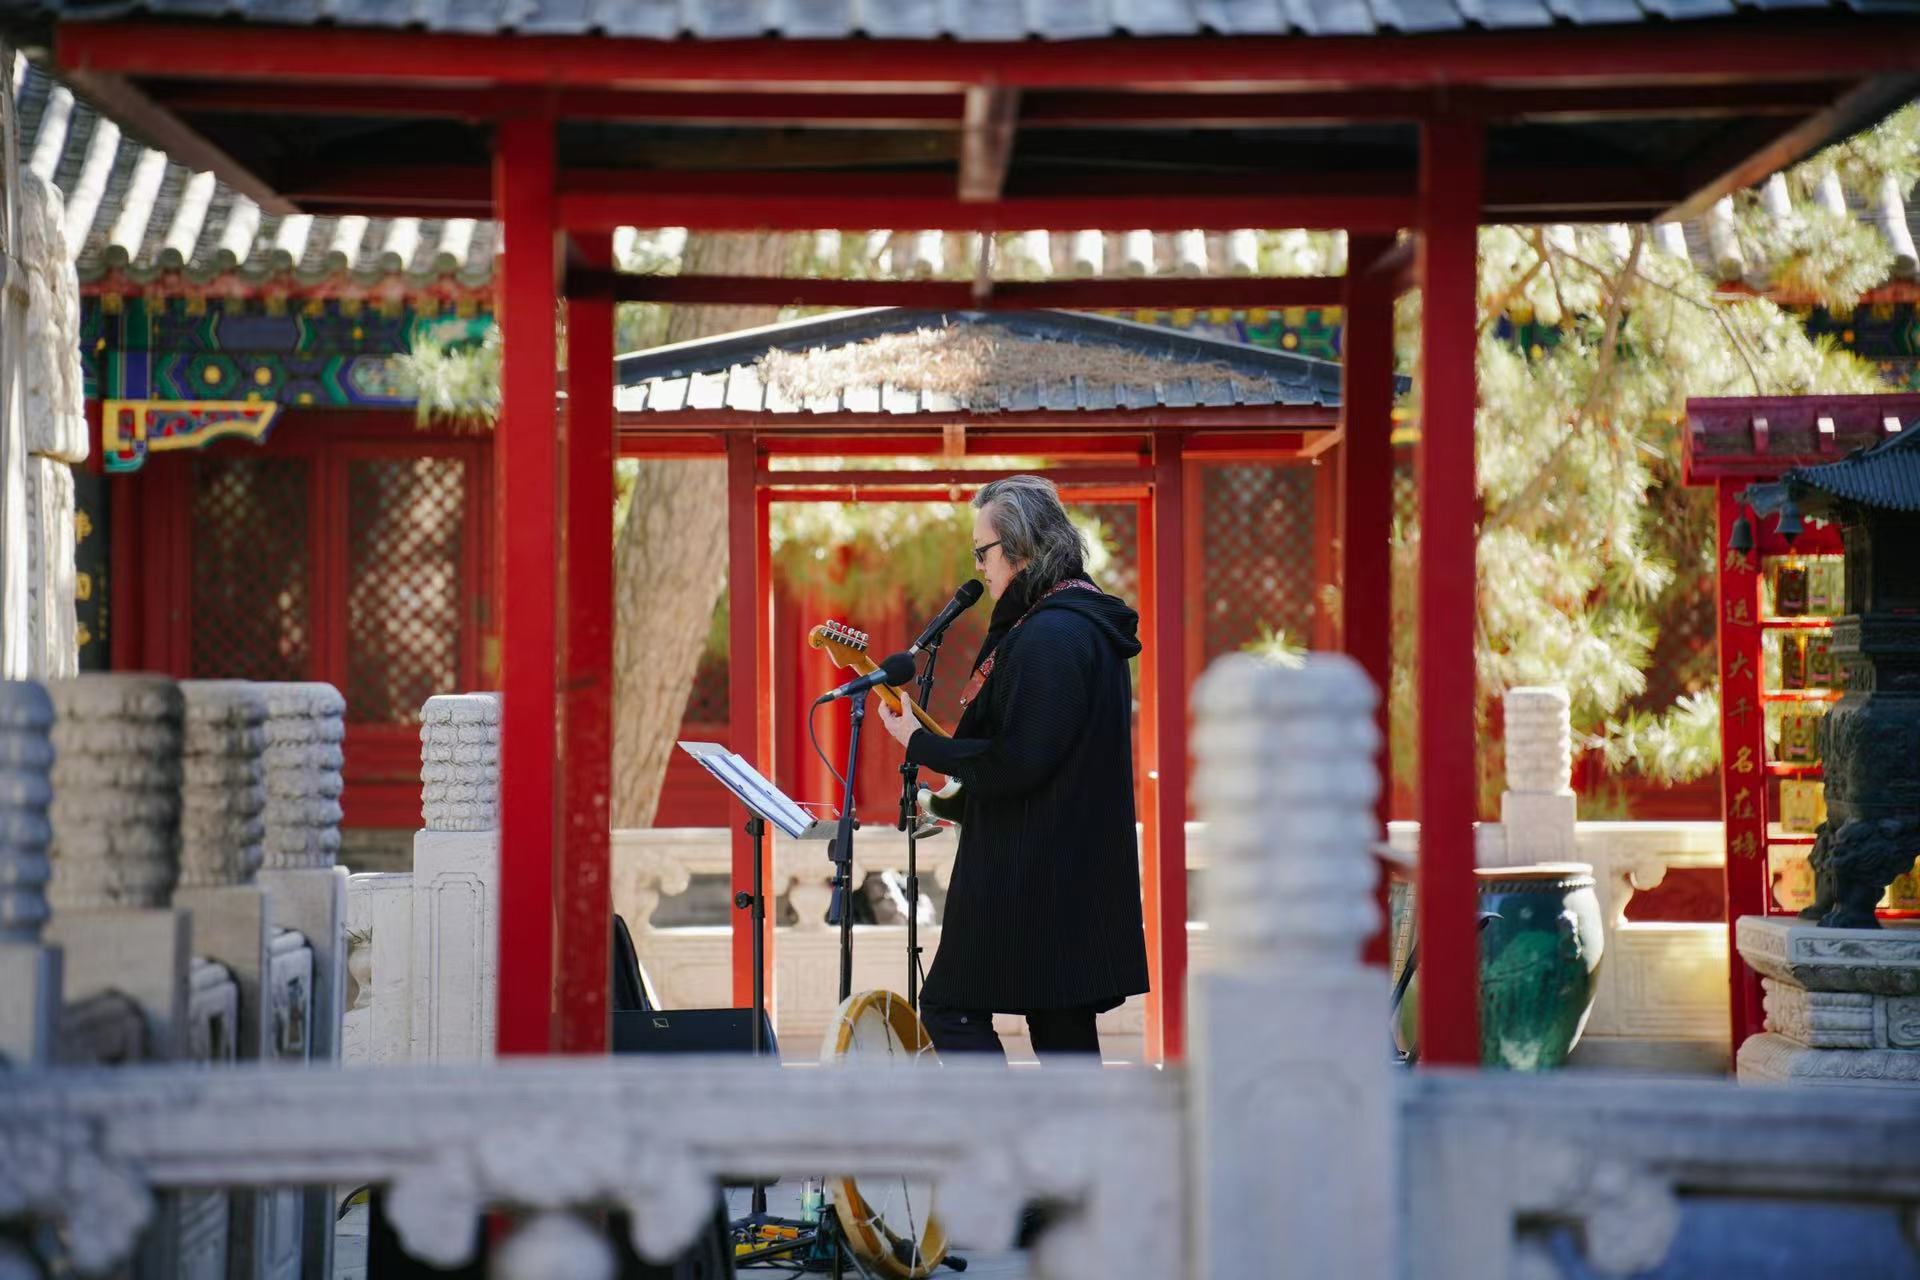 Song Song (Si Yang), a singer-songwriter, poet and photographer, plays at the Jietai Temple in Beijing, November 12, 2023. /Timeless Acoustics within the Ancient Walls